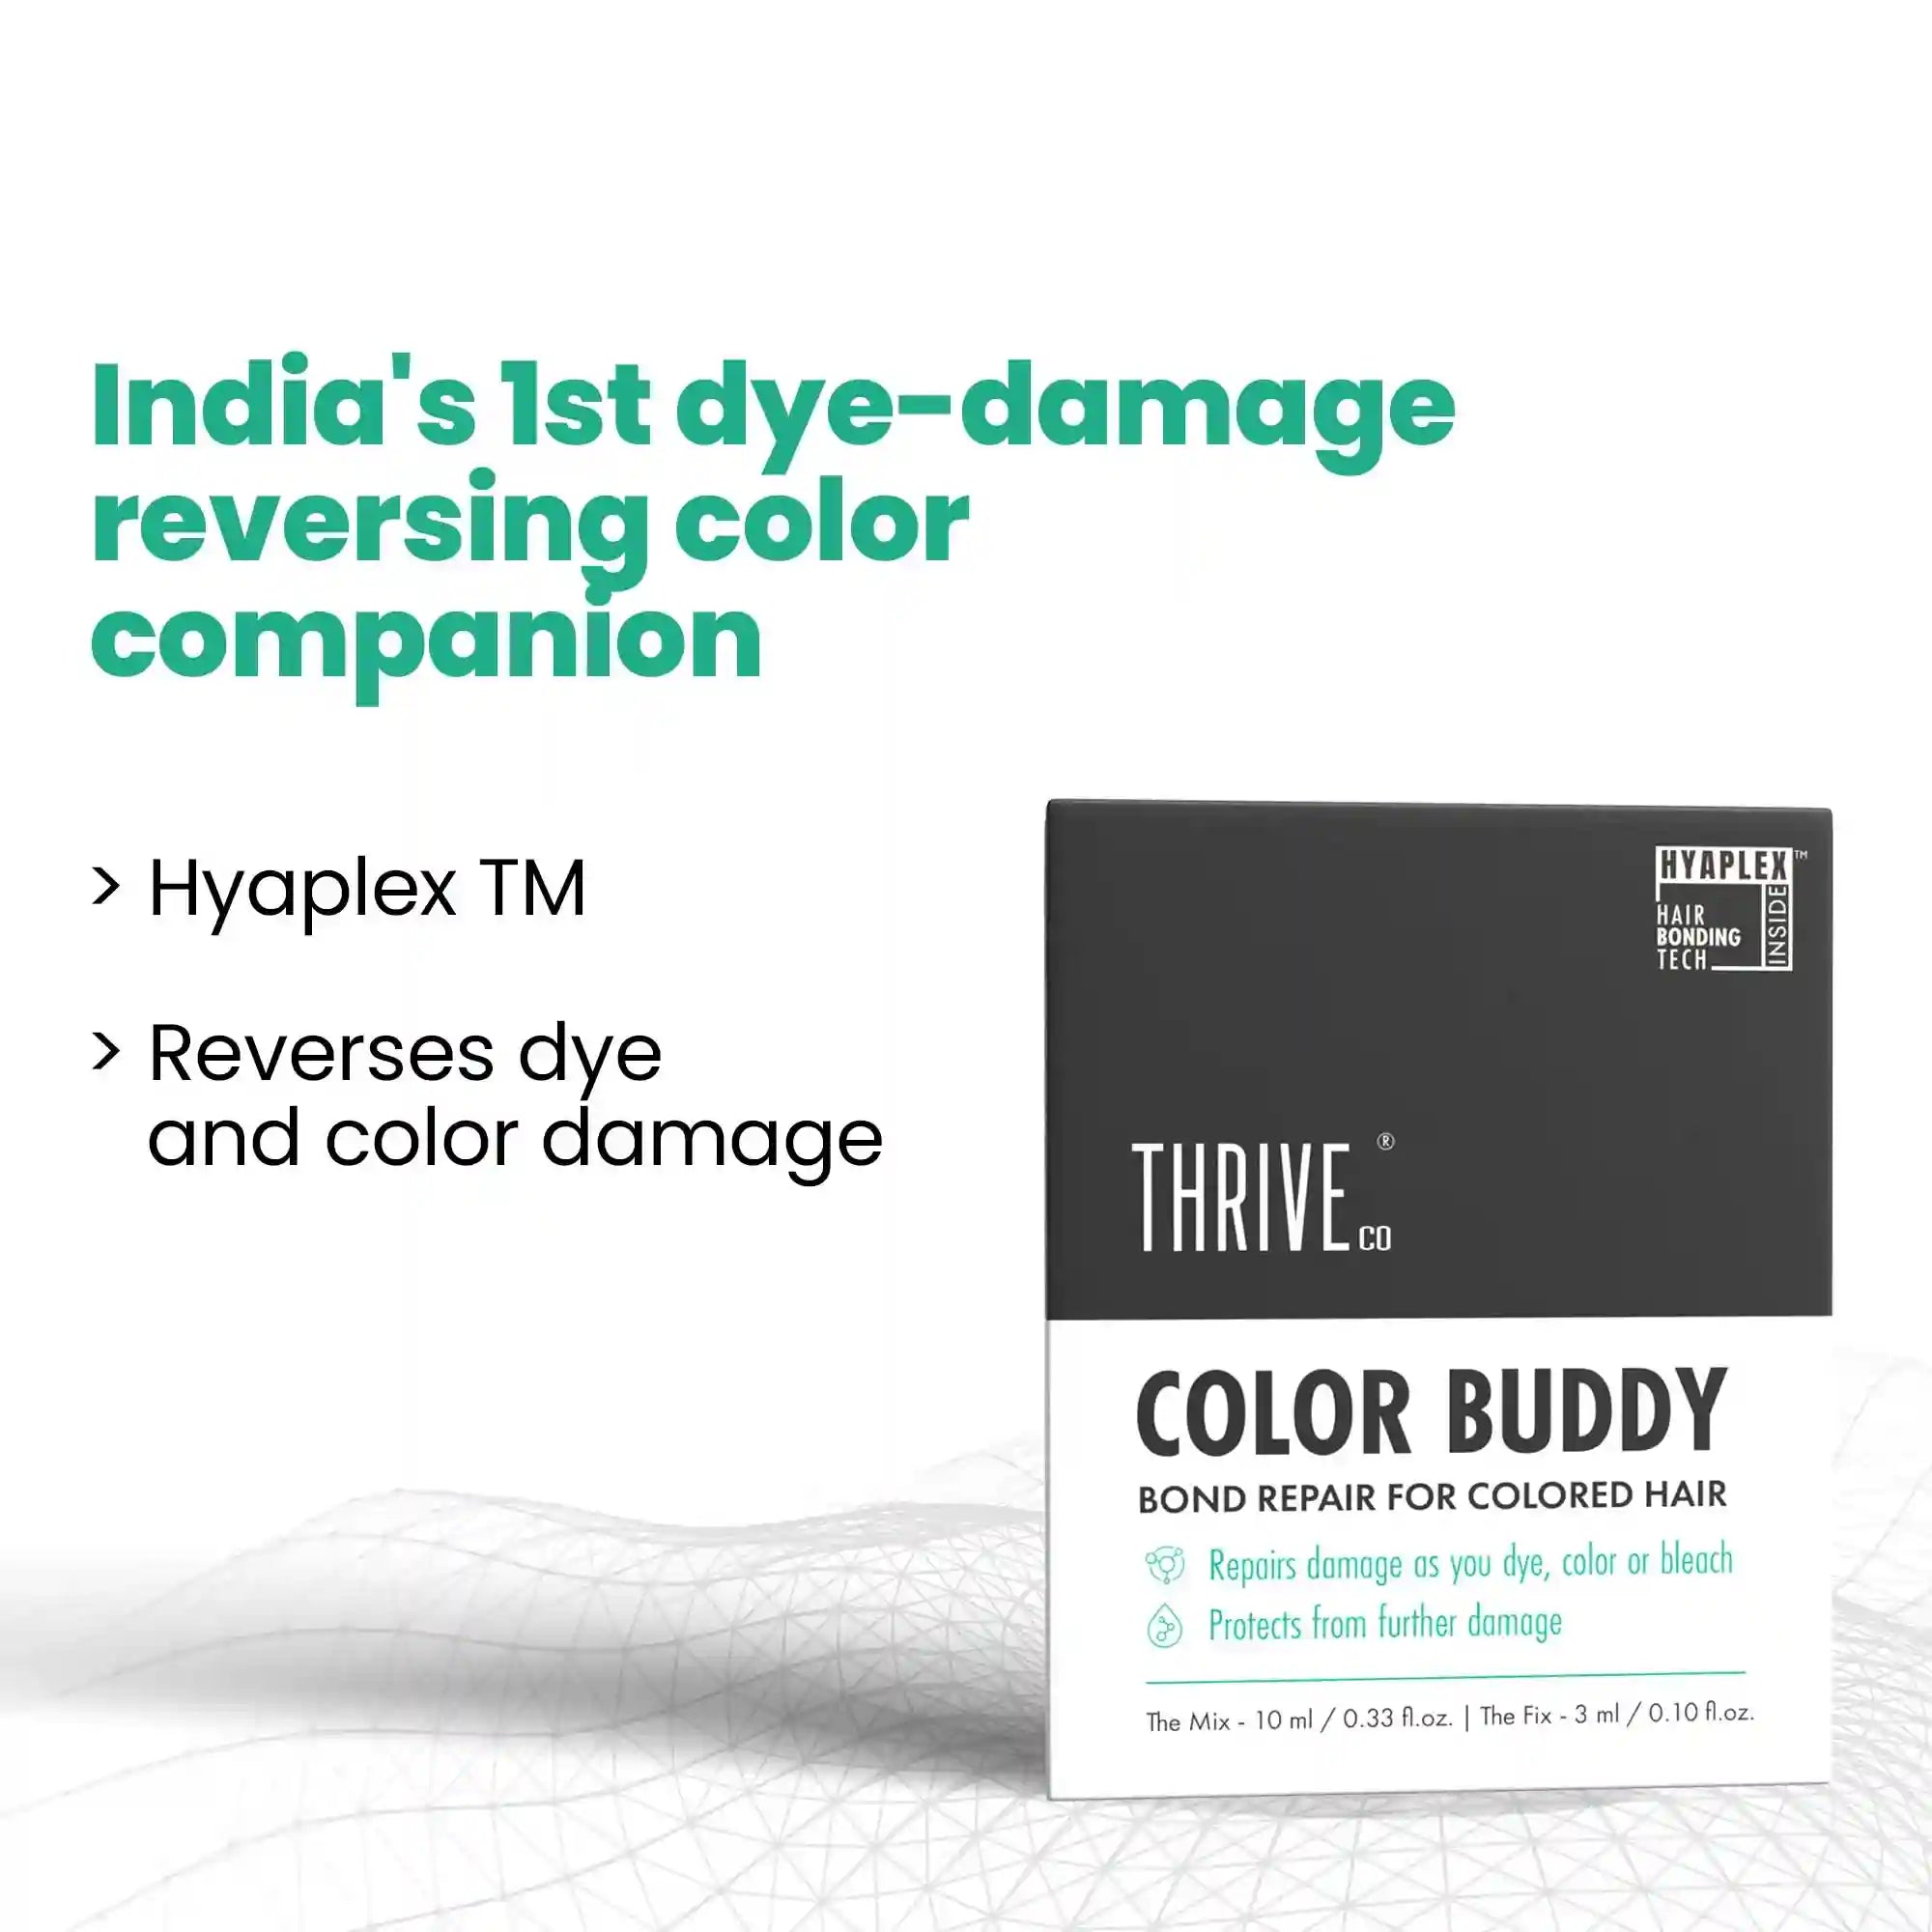 color buddy reverses dye and color damaged hair